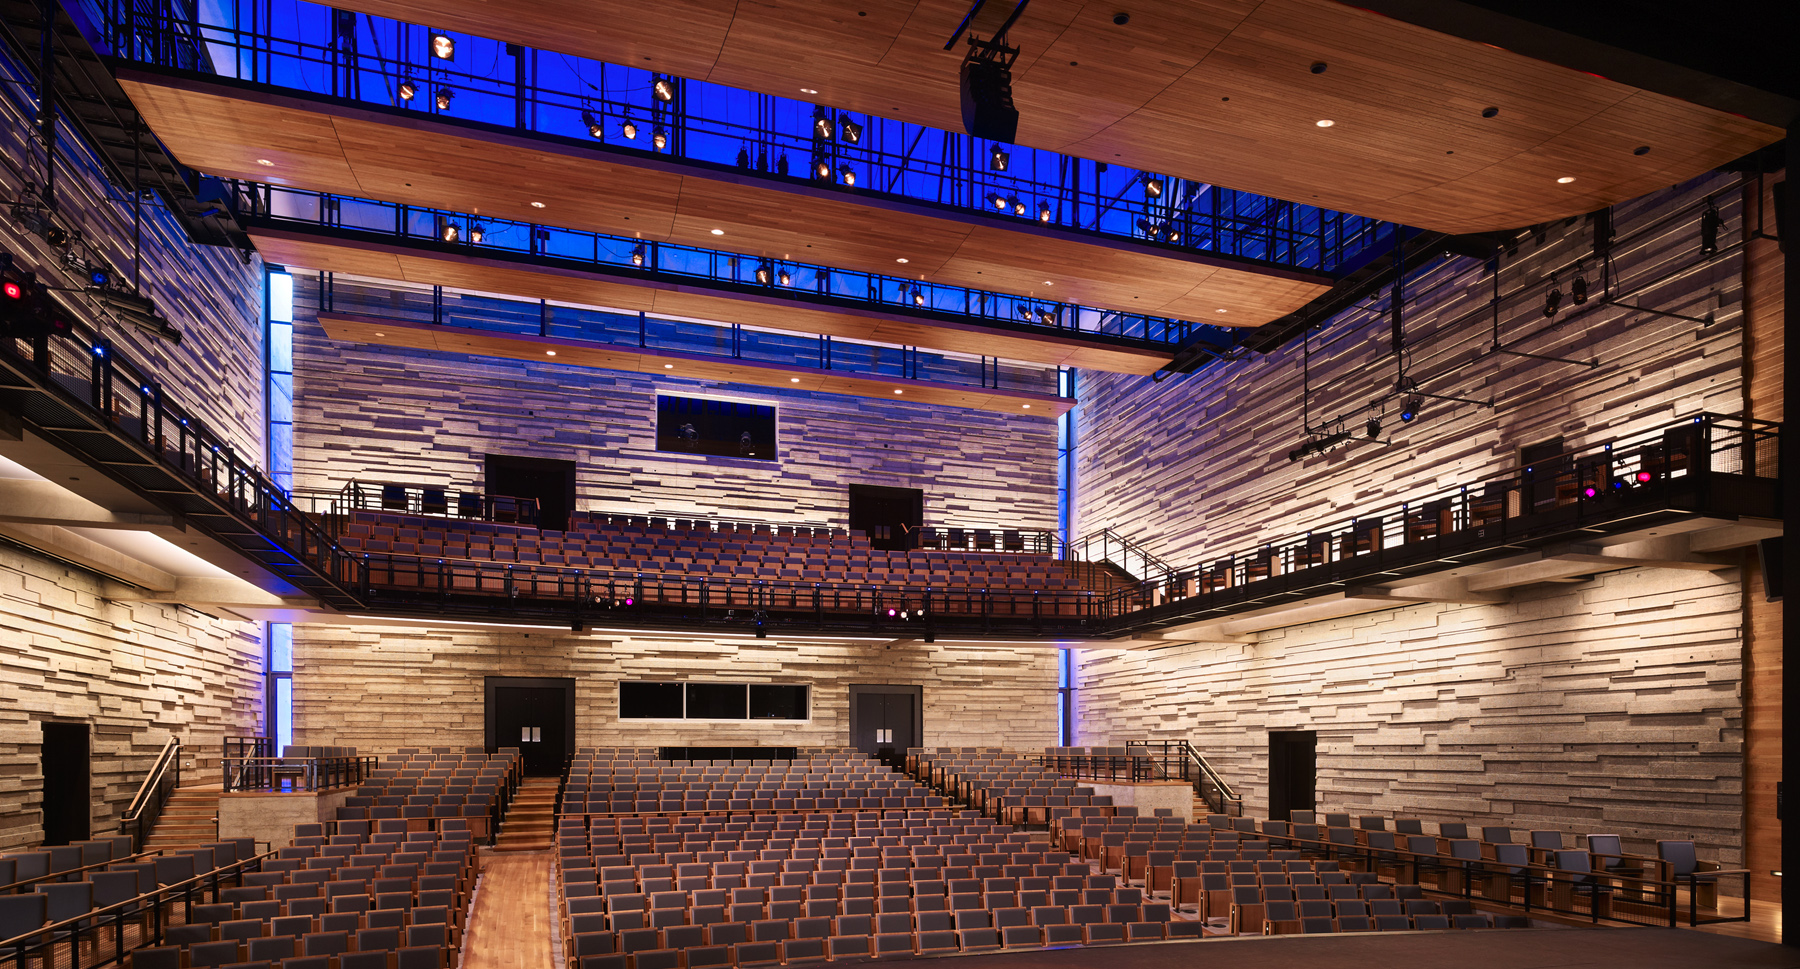 The Performance hall at the ACC